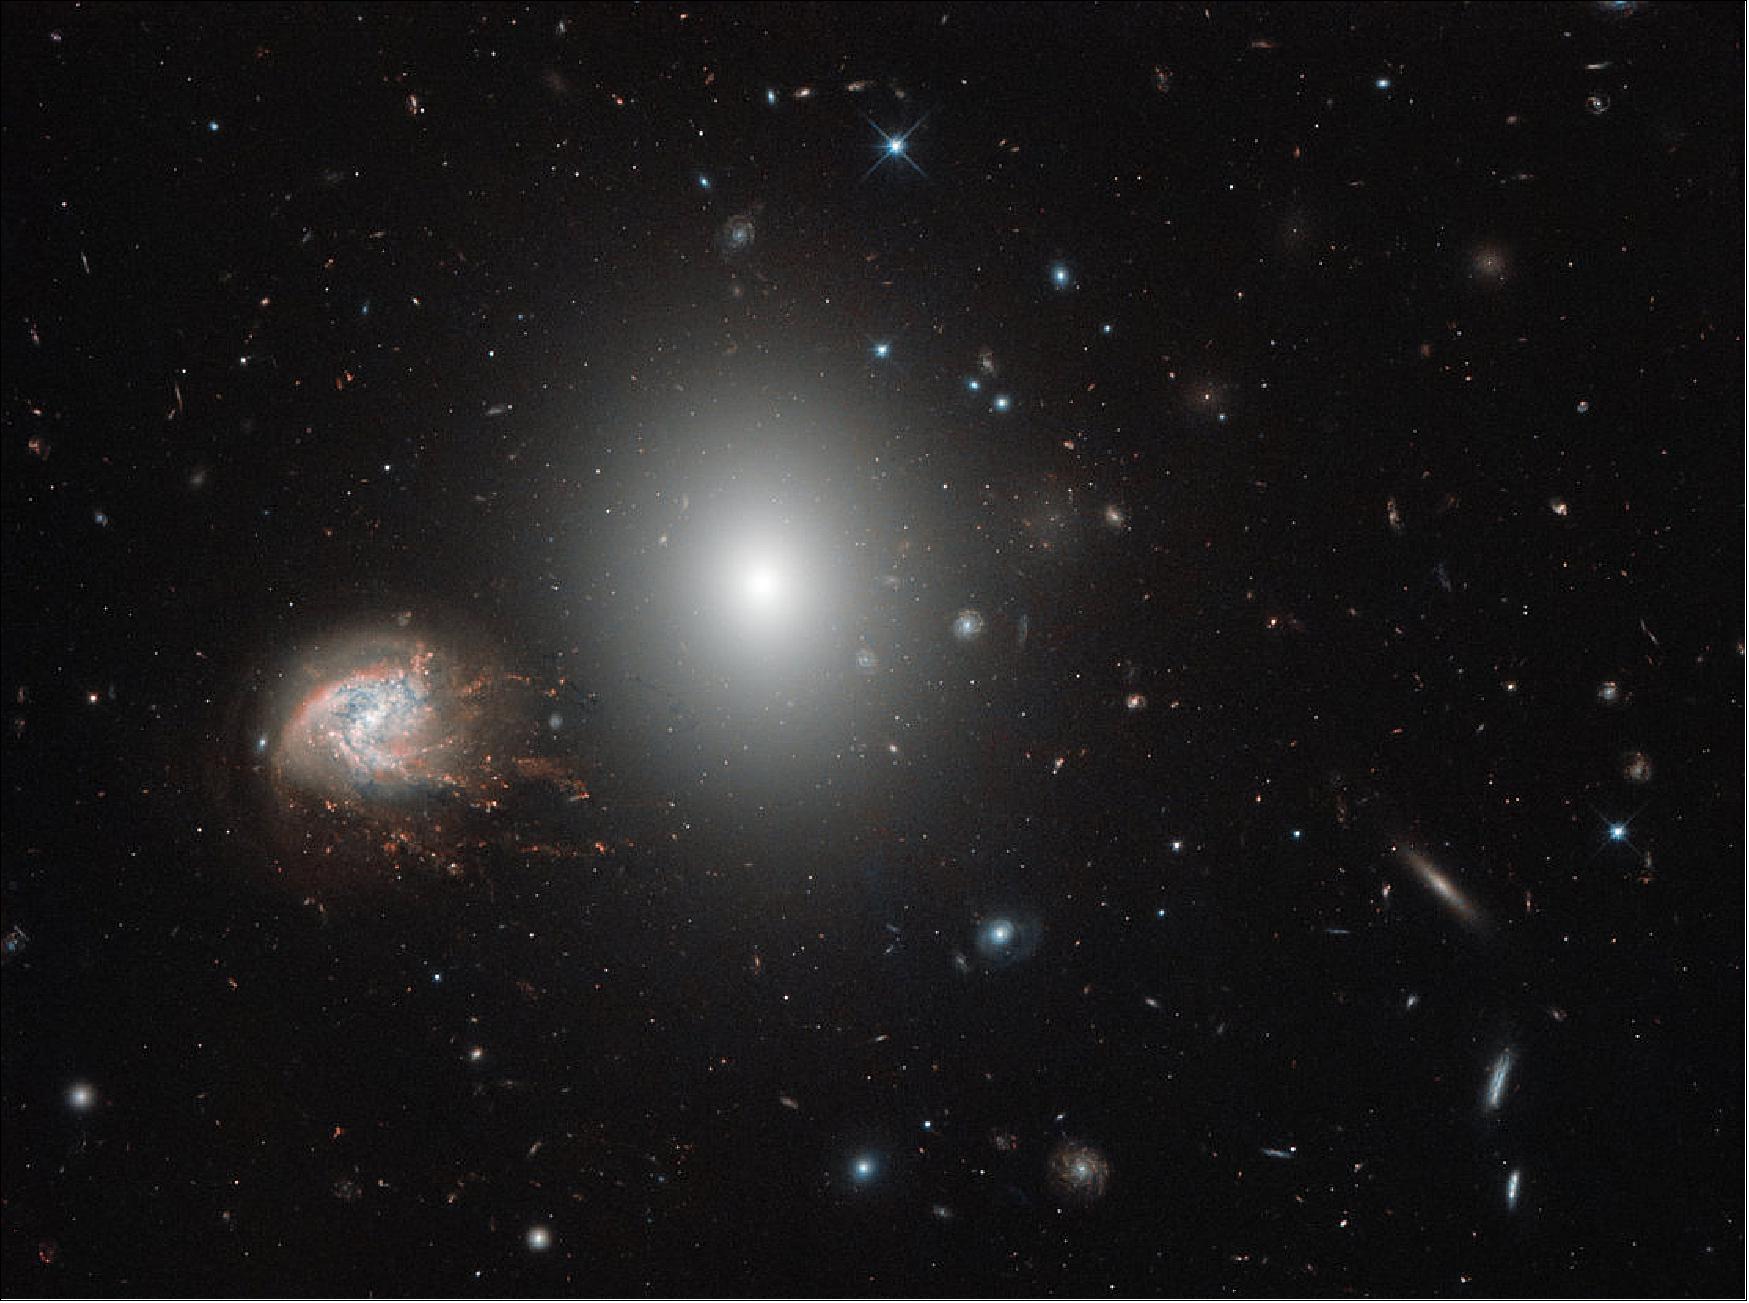 Figure 20: This scene of the impressive Coma Cluster was captured by the NASA/ESA Hubble Space Telescope’s Wide Field Camera 3 (WFC3), a powerful camera designed to explore the evolution of stars and galaxies in the early Universe (image credit: ESA/Hubble & NASA, CC BY 4.0)